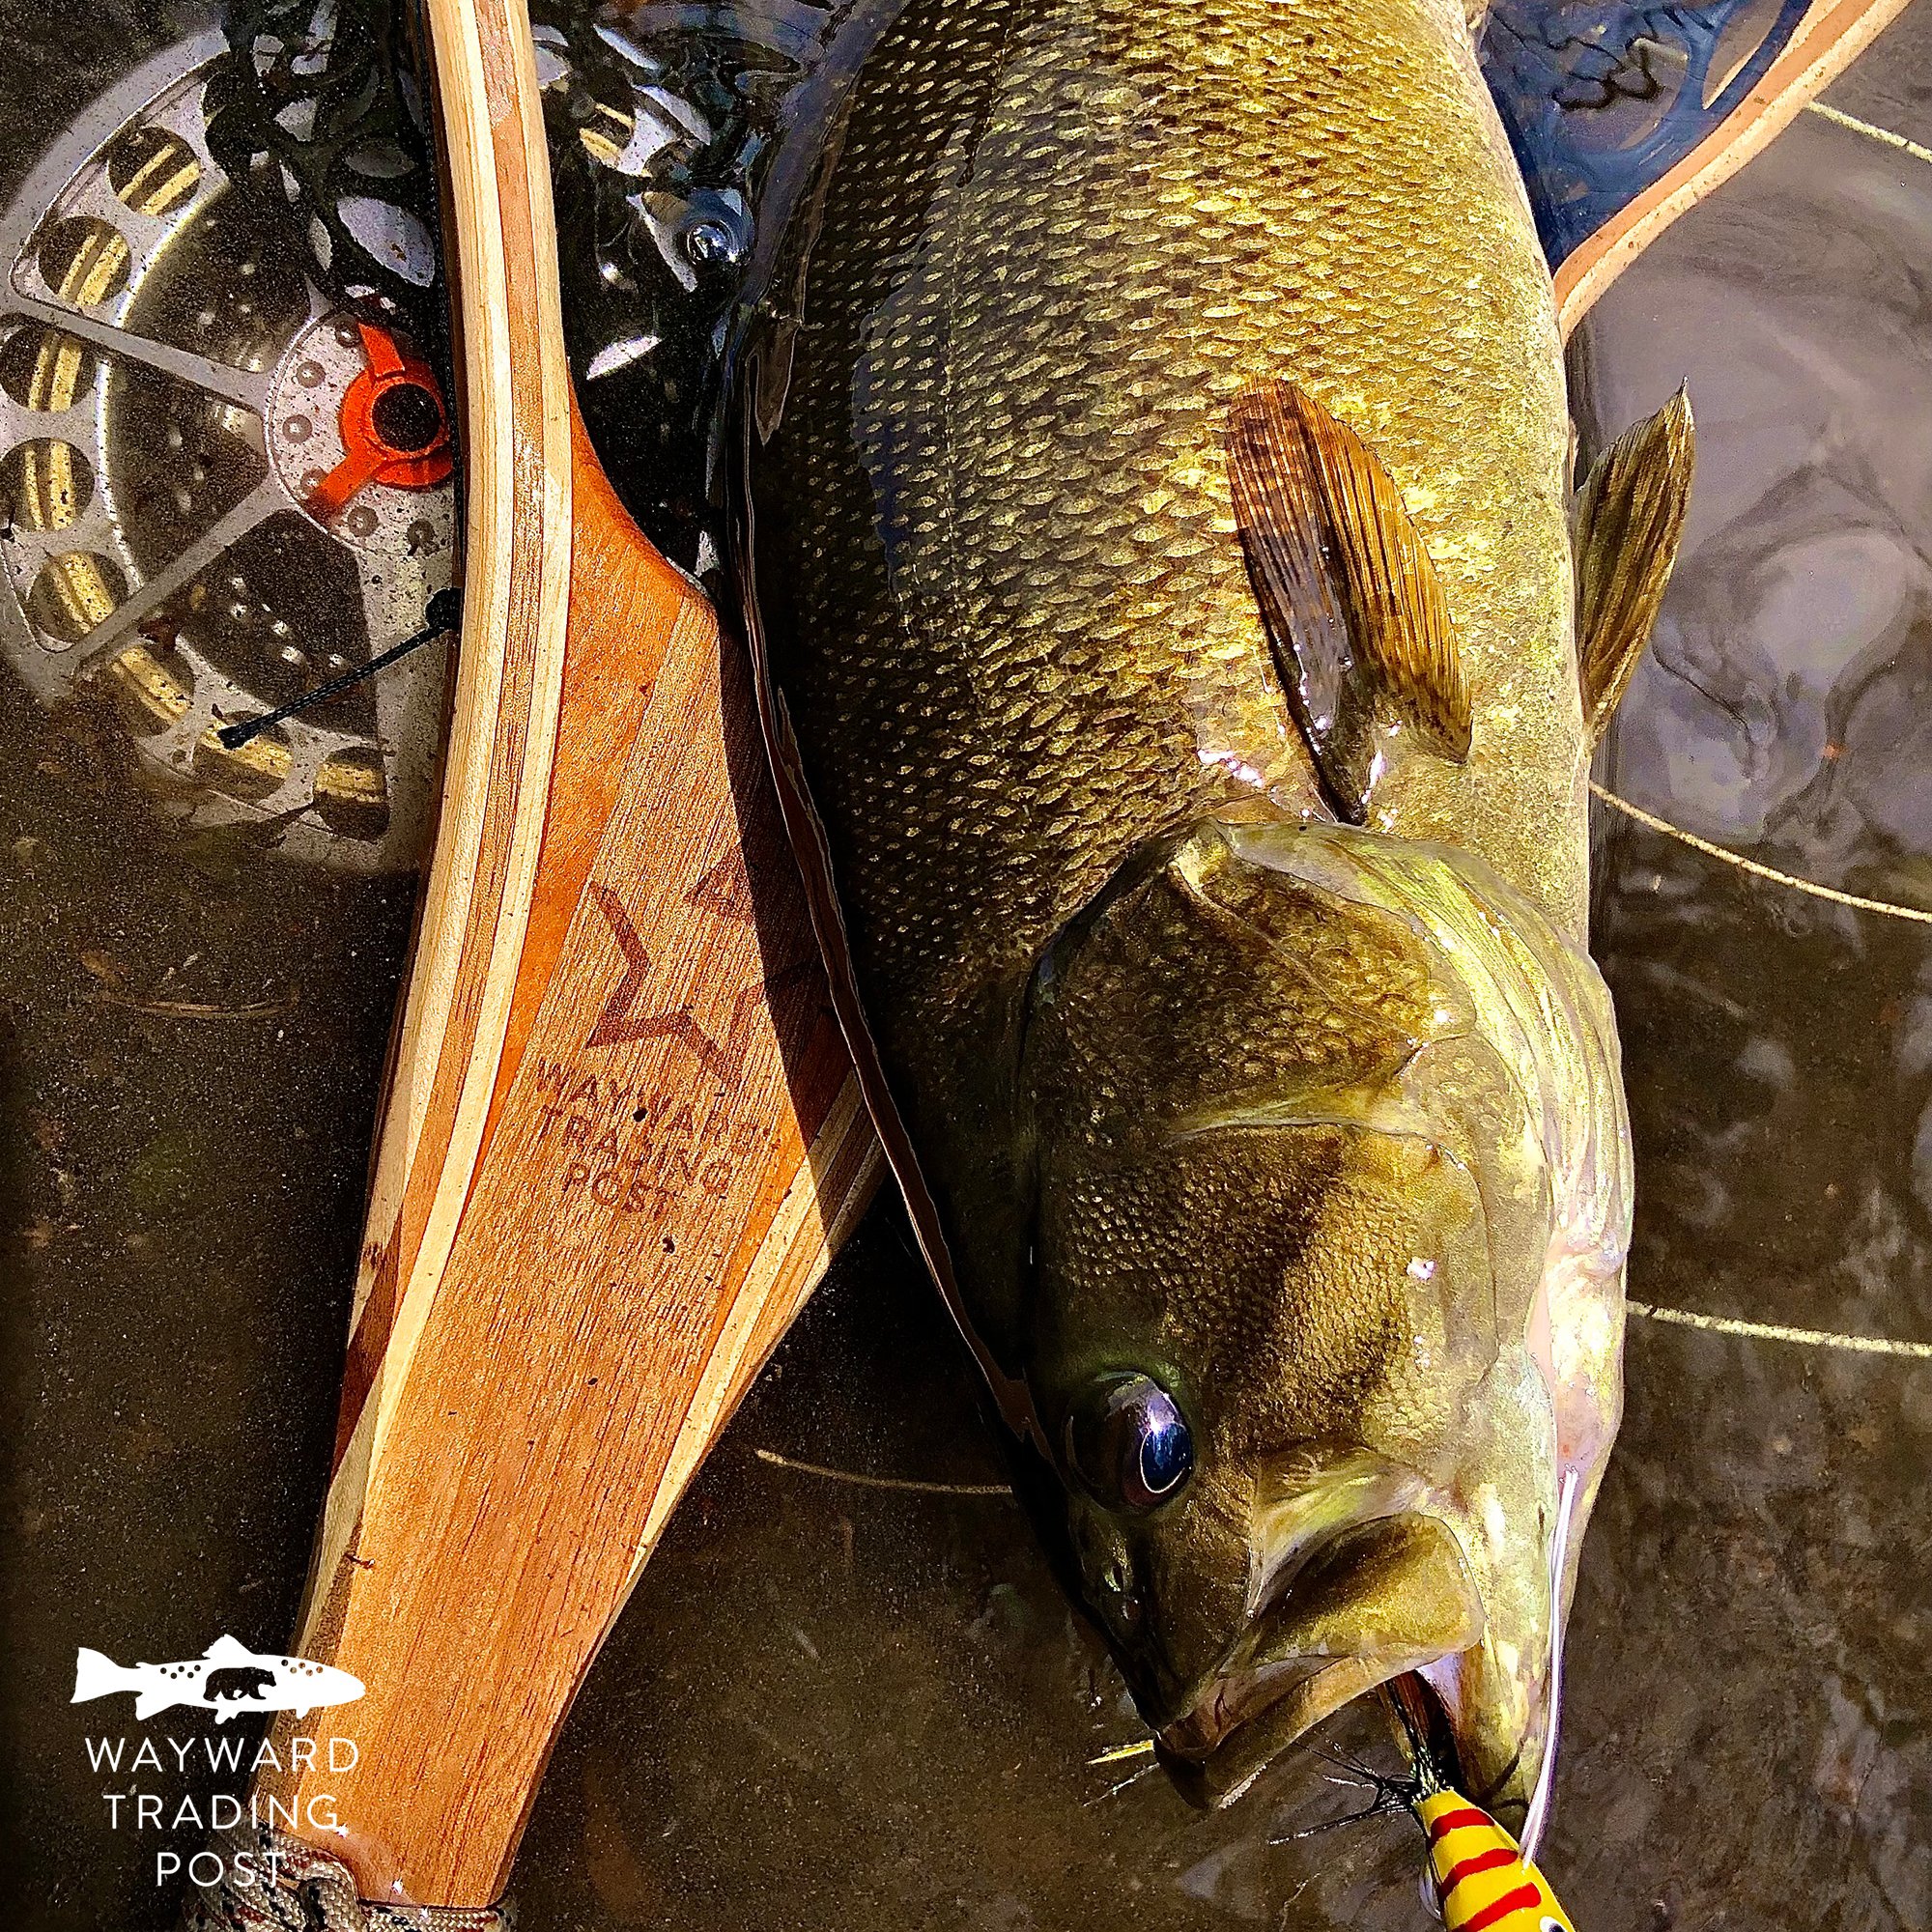 war medal object inlay fly fishing landing net hand made with wooden  customization — Wayward Handcrafted Fly Fishing Gear - made in Philadelphia  USAWood Fly Fishing net - Handcrafted Custom Fly Fishing